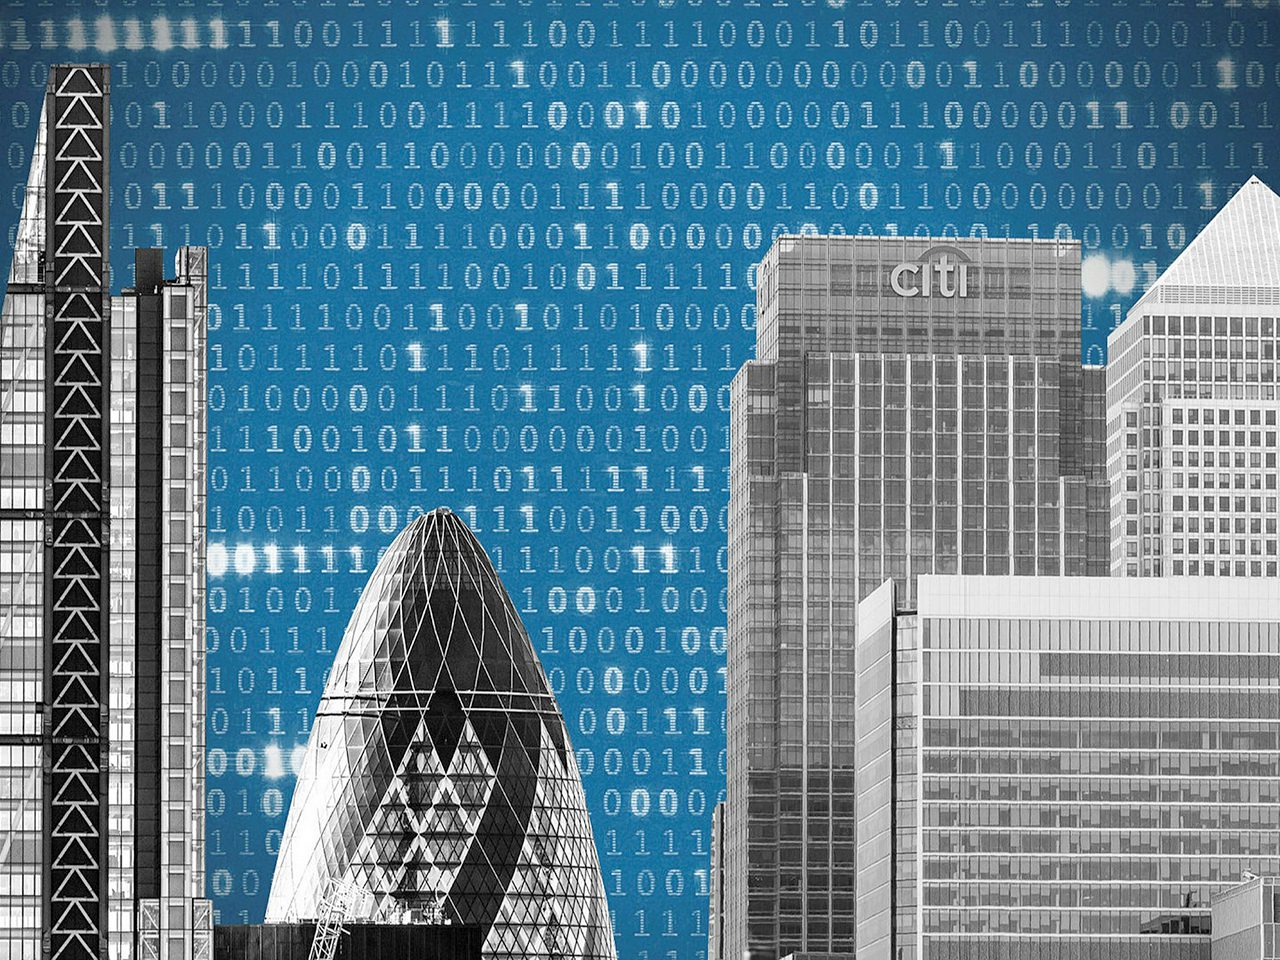 The competitive edge of the UK fintech market